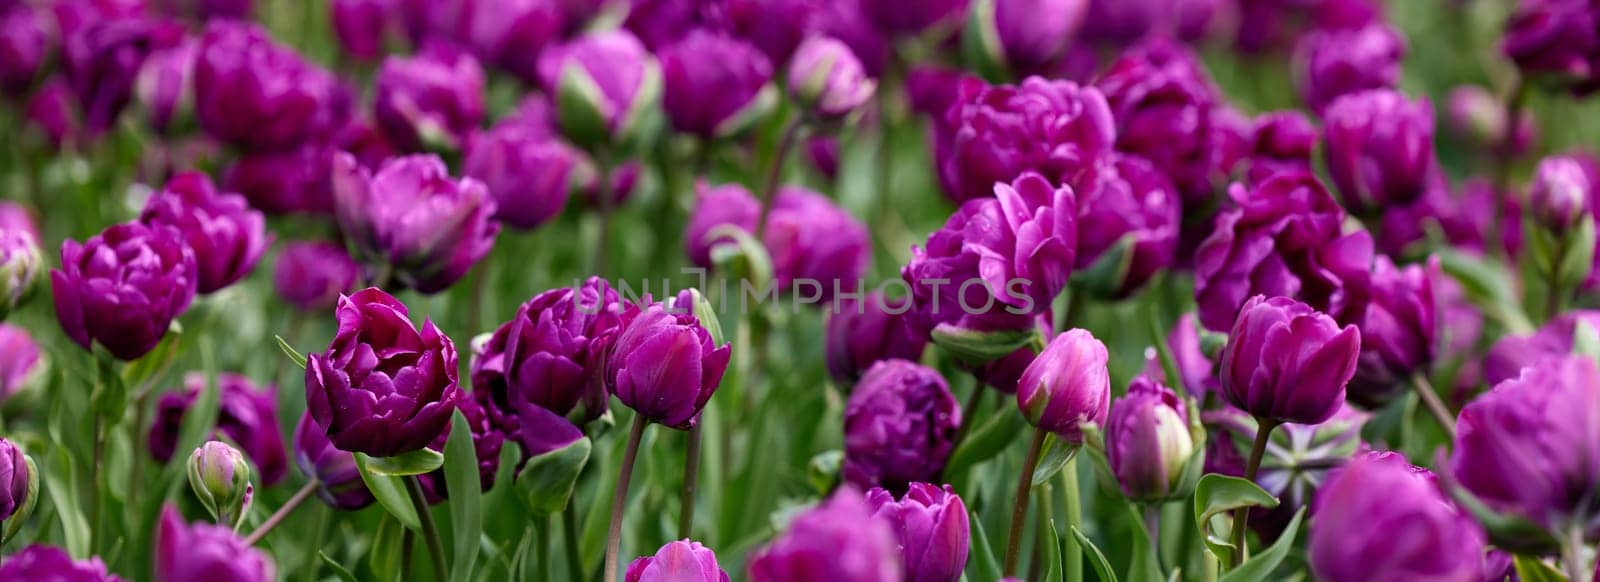 Beautiful bright colorful purple Spring tulips. Field of tulips. Tulip flowers blooming in the garden. Panning over many tulips in a field in spring. Colorful field of flowers in nature. by EvgeniyQW